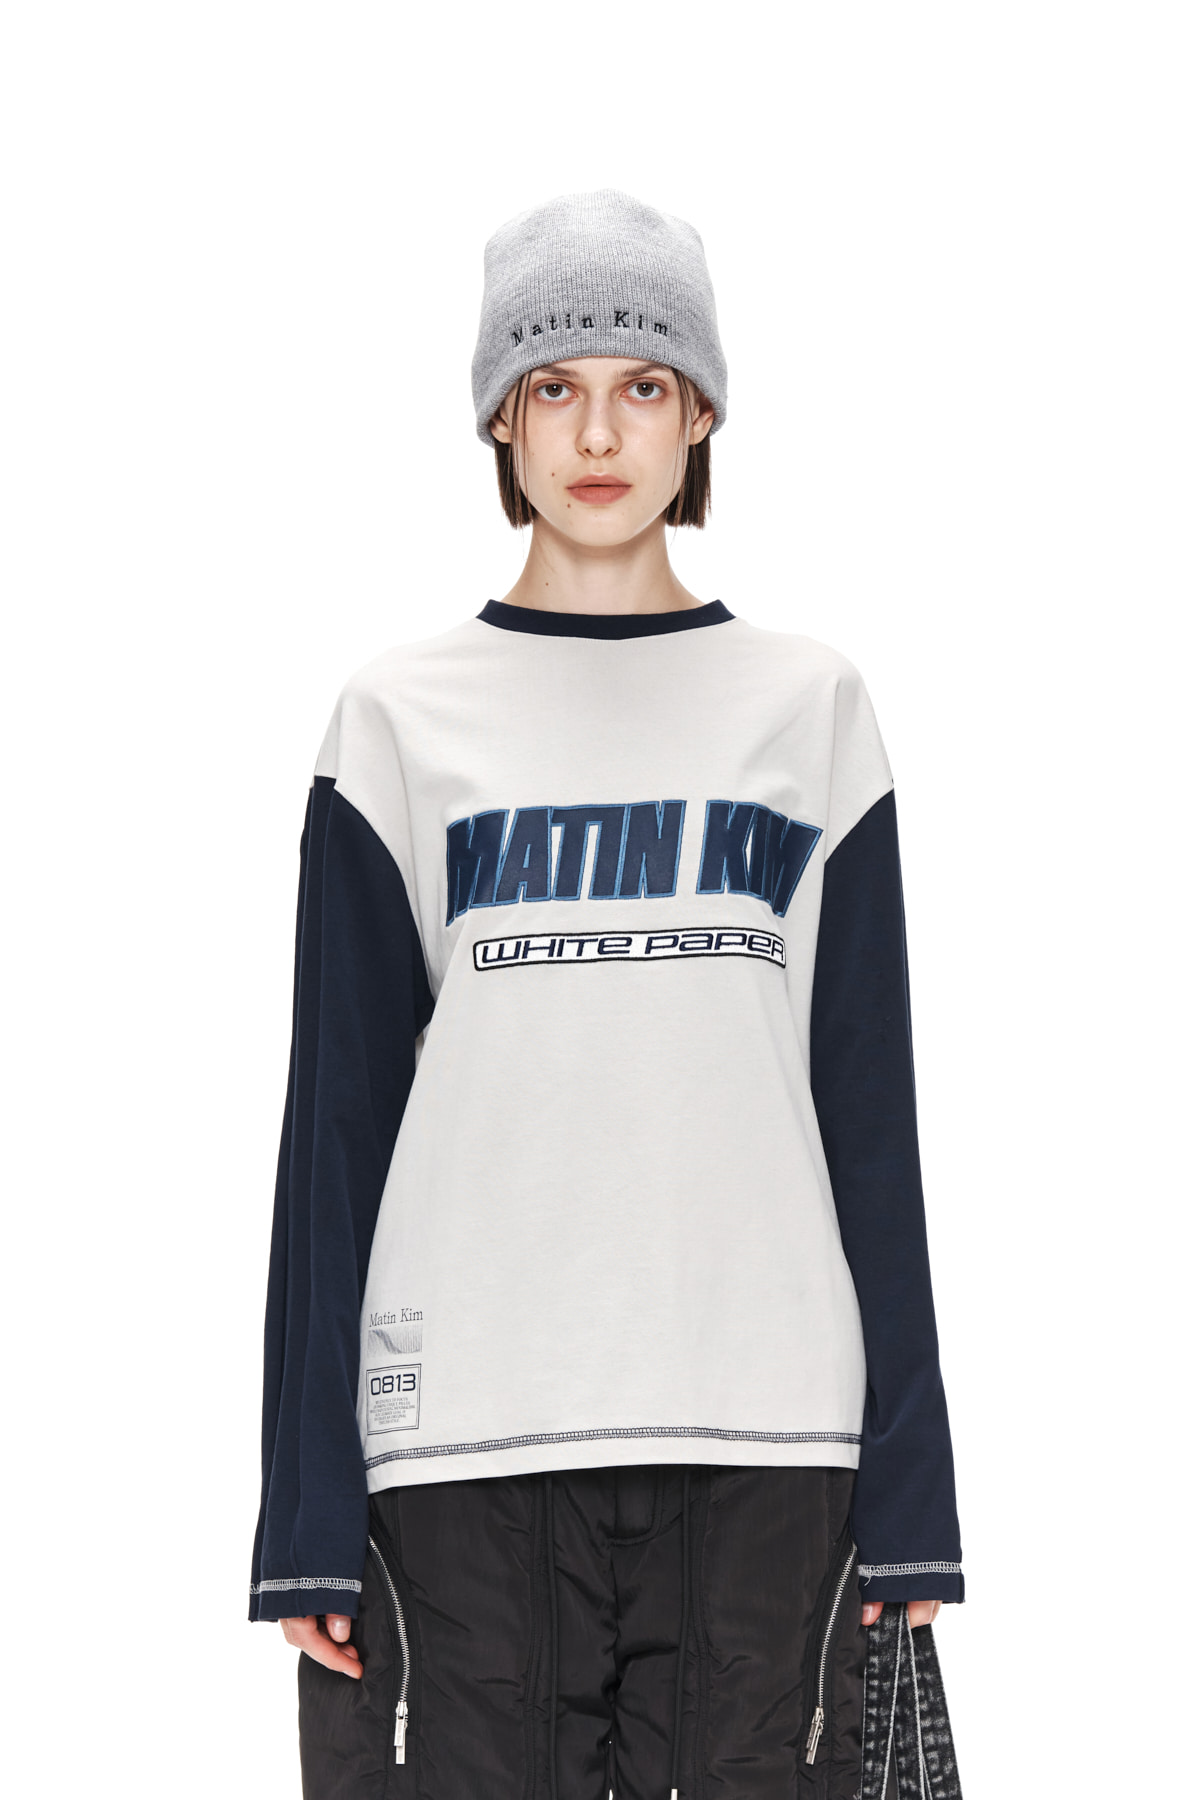 MATIN SPORTS CLUB LONG SLEEVE TOP IN NAVY